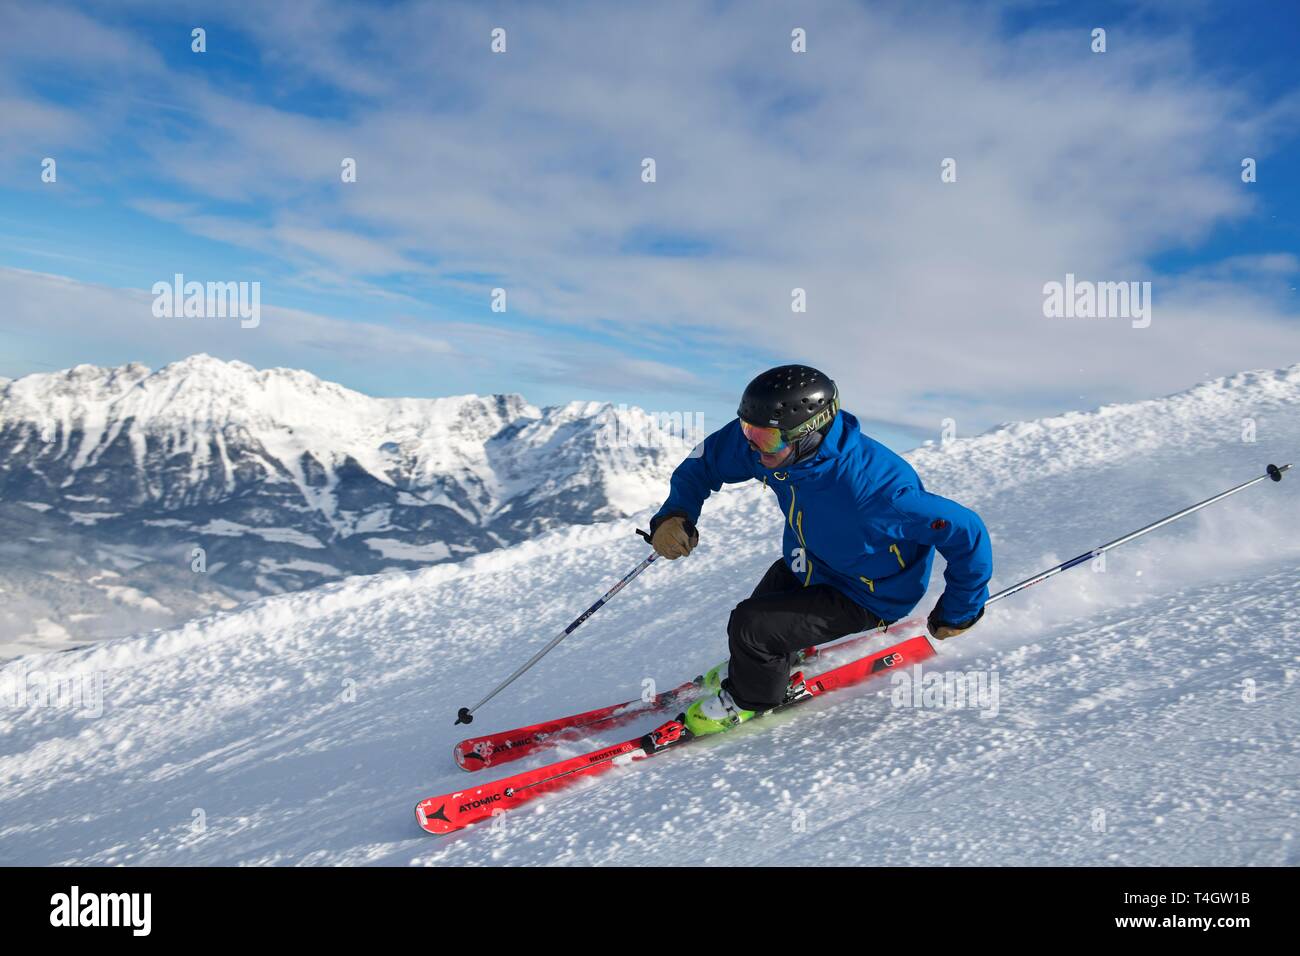 Young skier with sporty style of skiing at the descent from the Hohe Salve, Hopfgarten, Tyrol, Austria Stock Photo